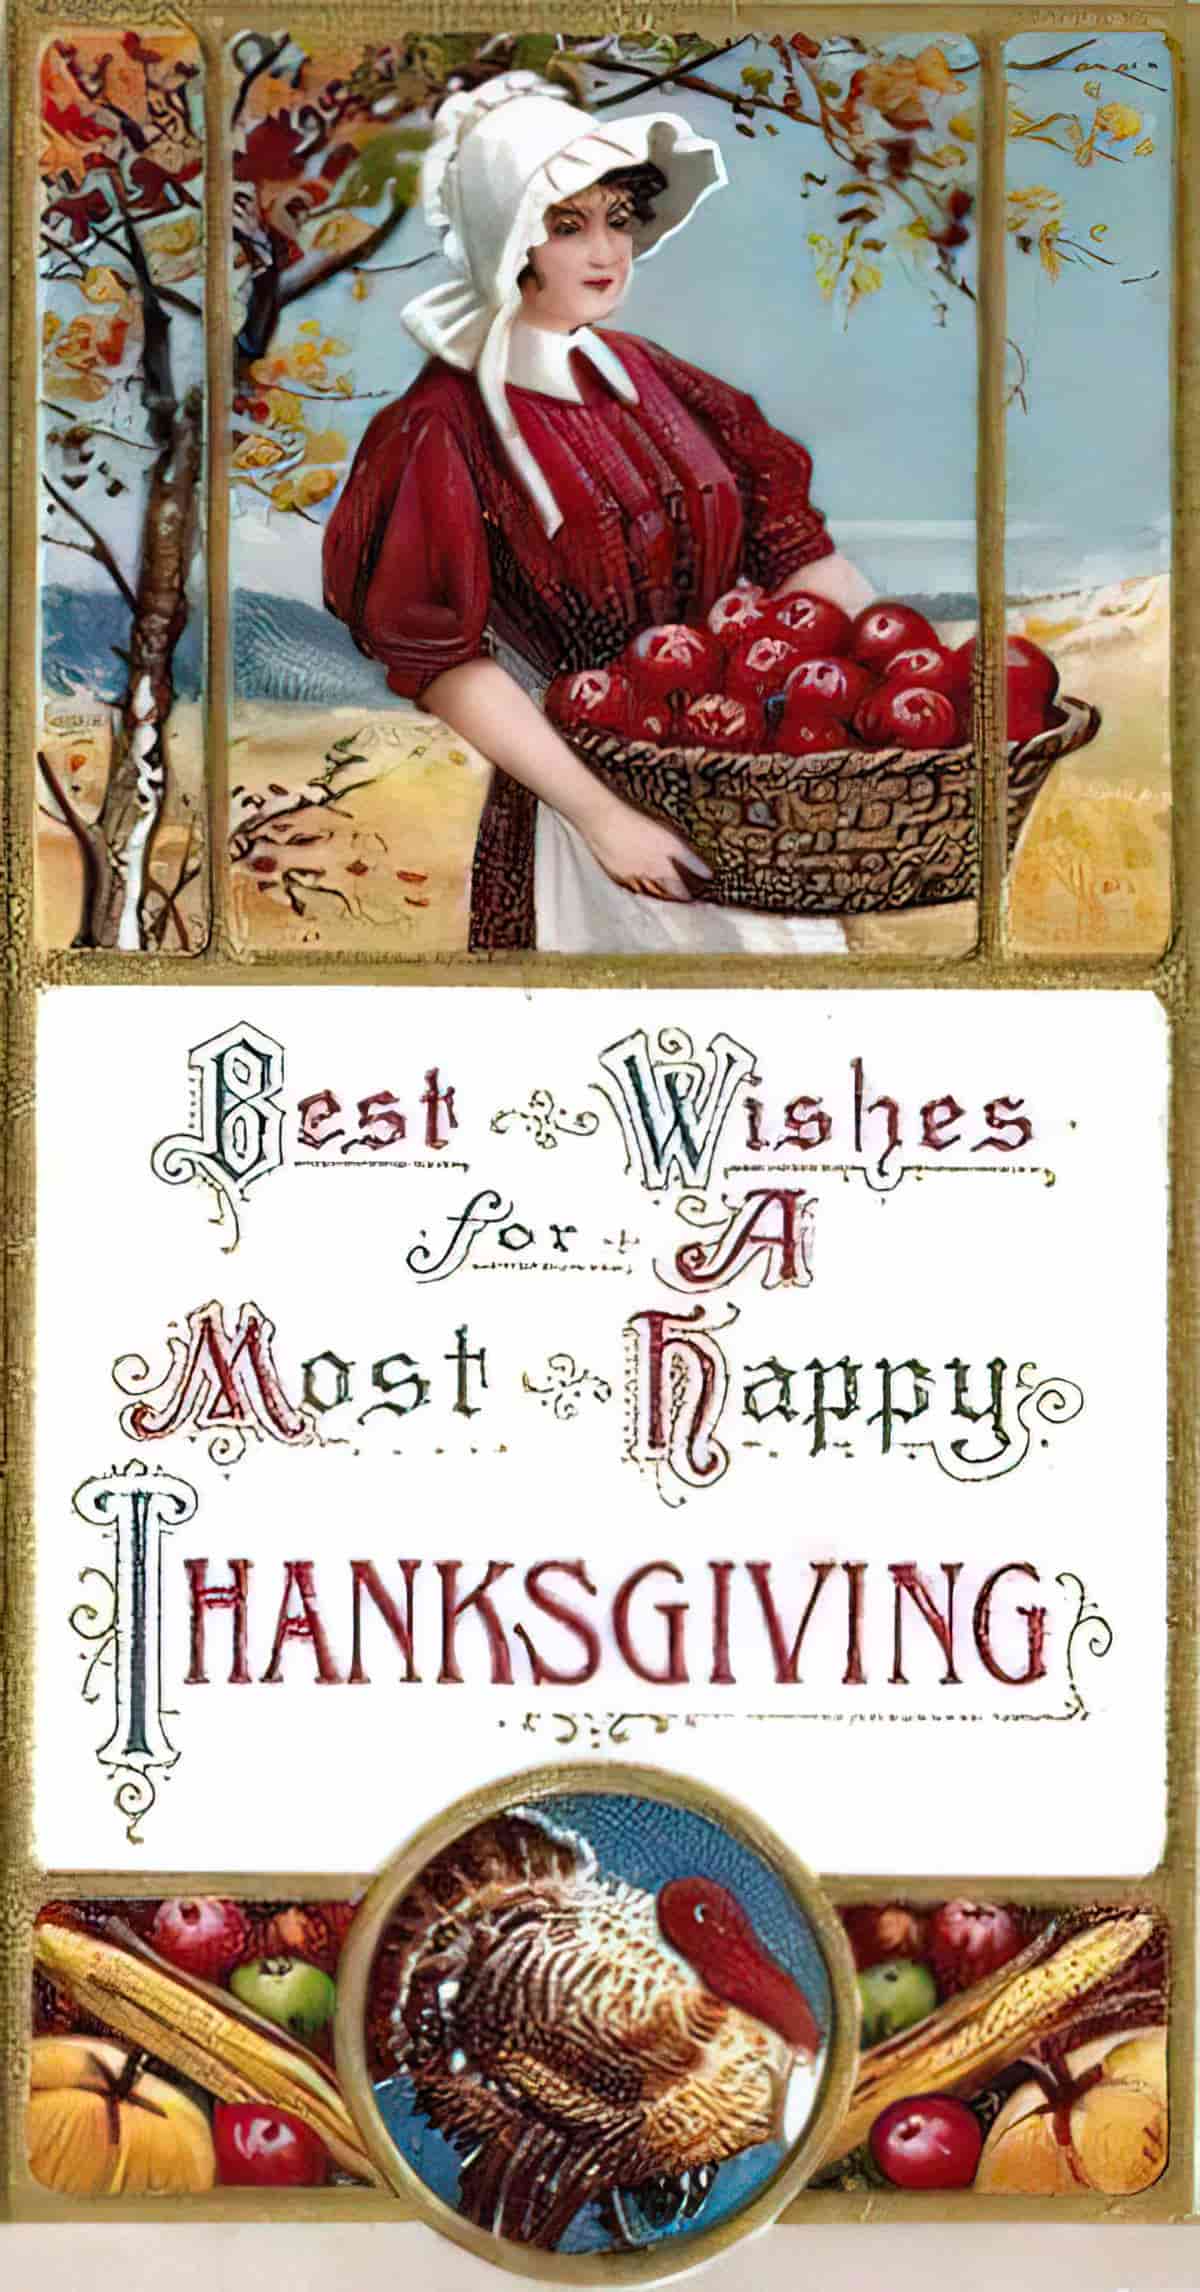 A collection of Thanksgiving art from the 20th century, including postcards, magazine covers and advertising material.